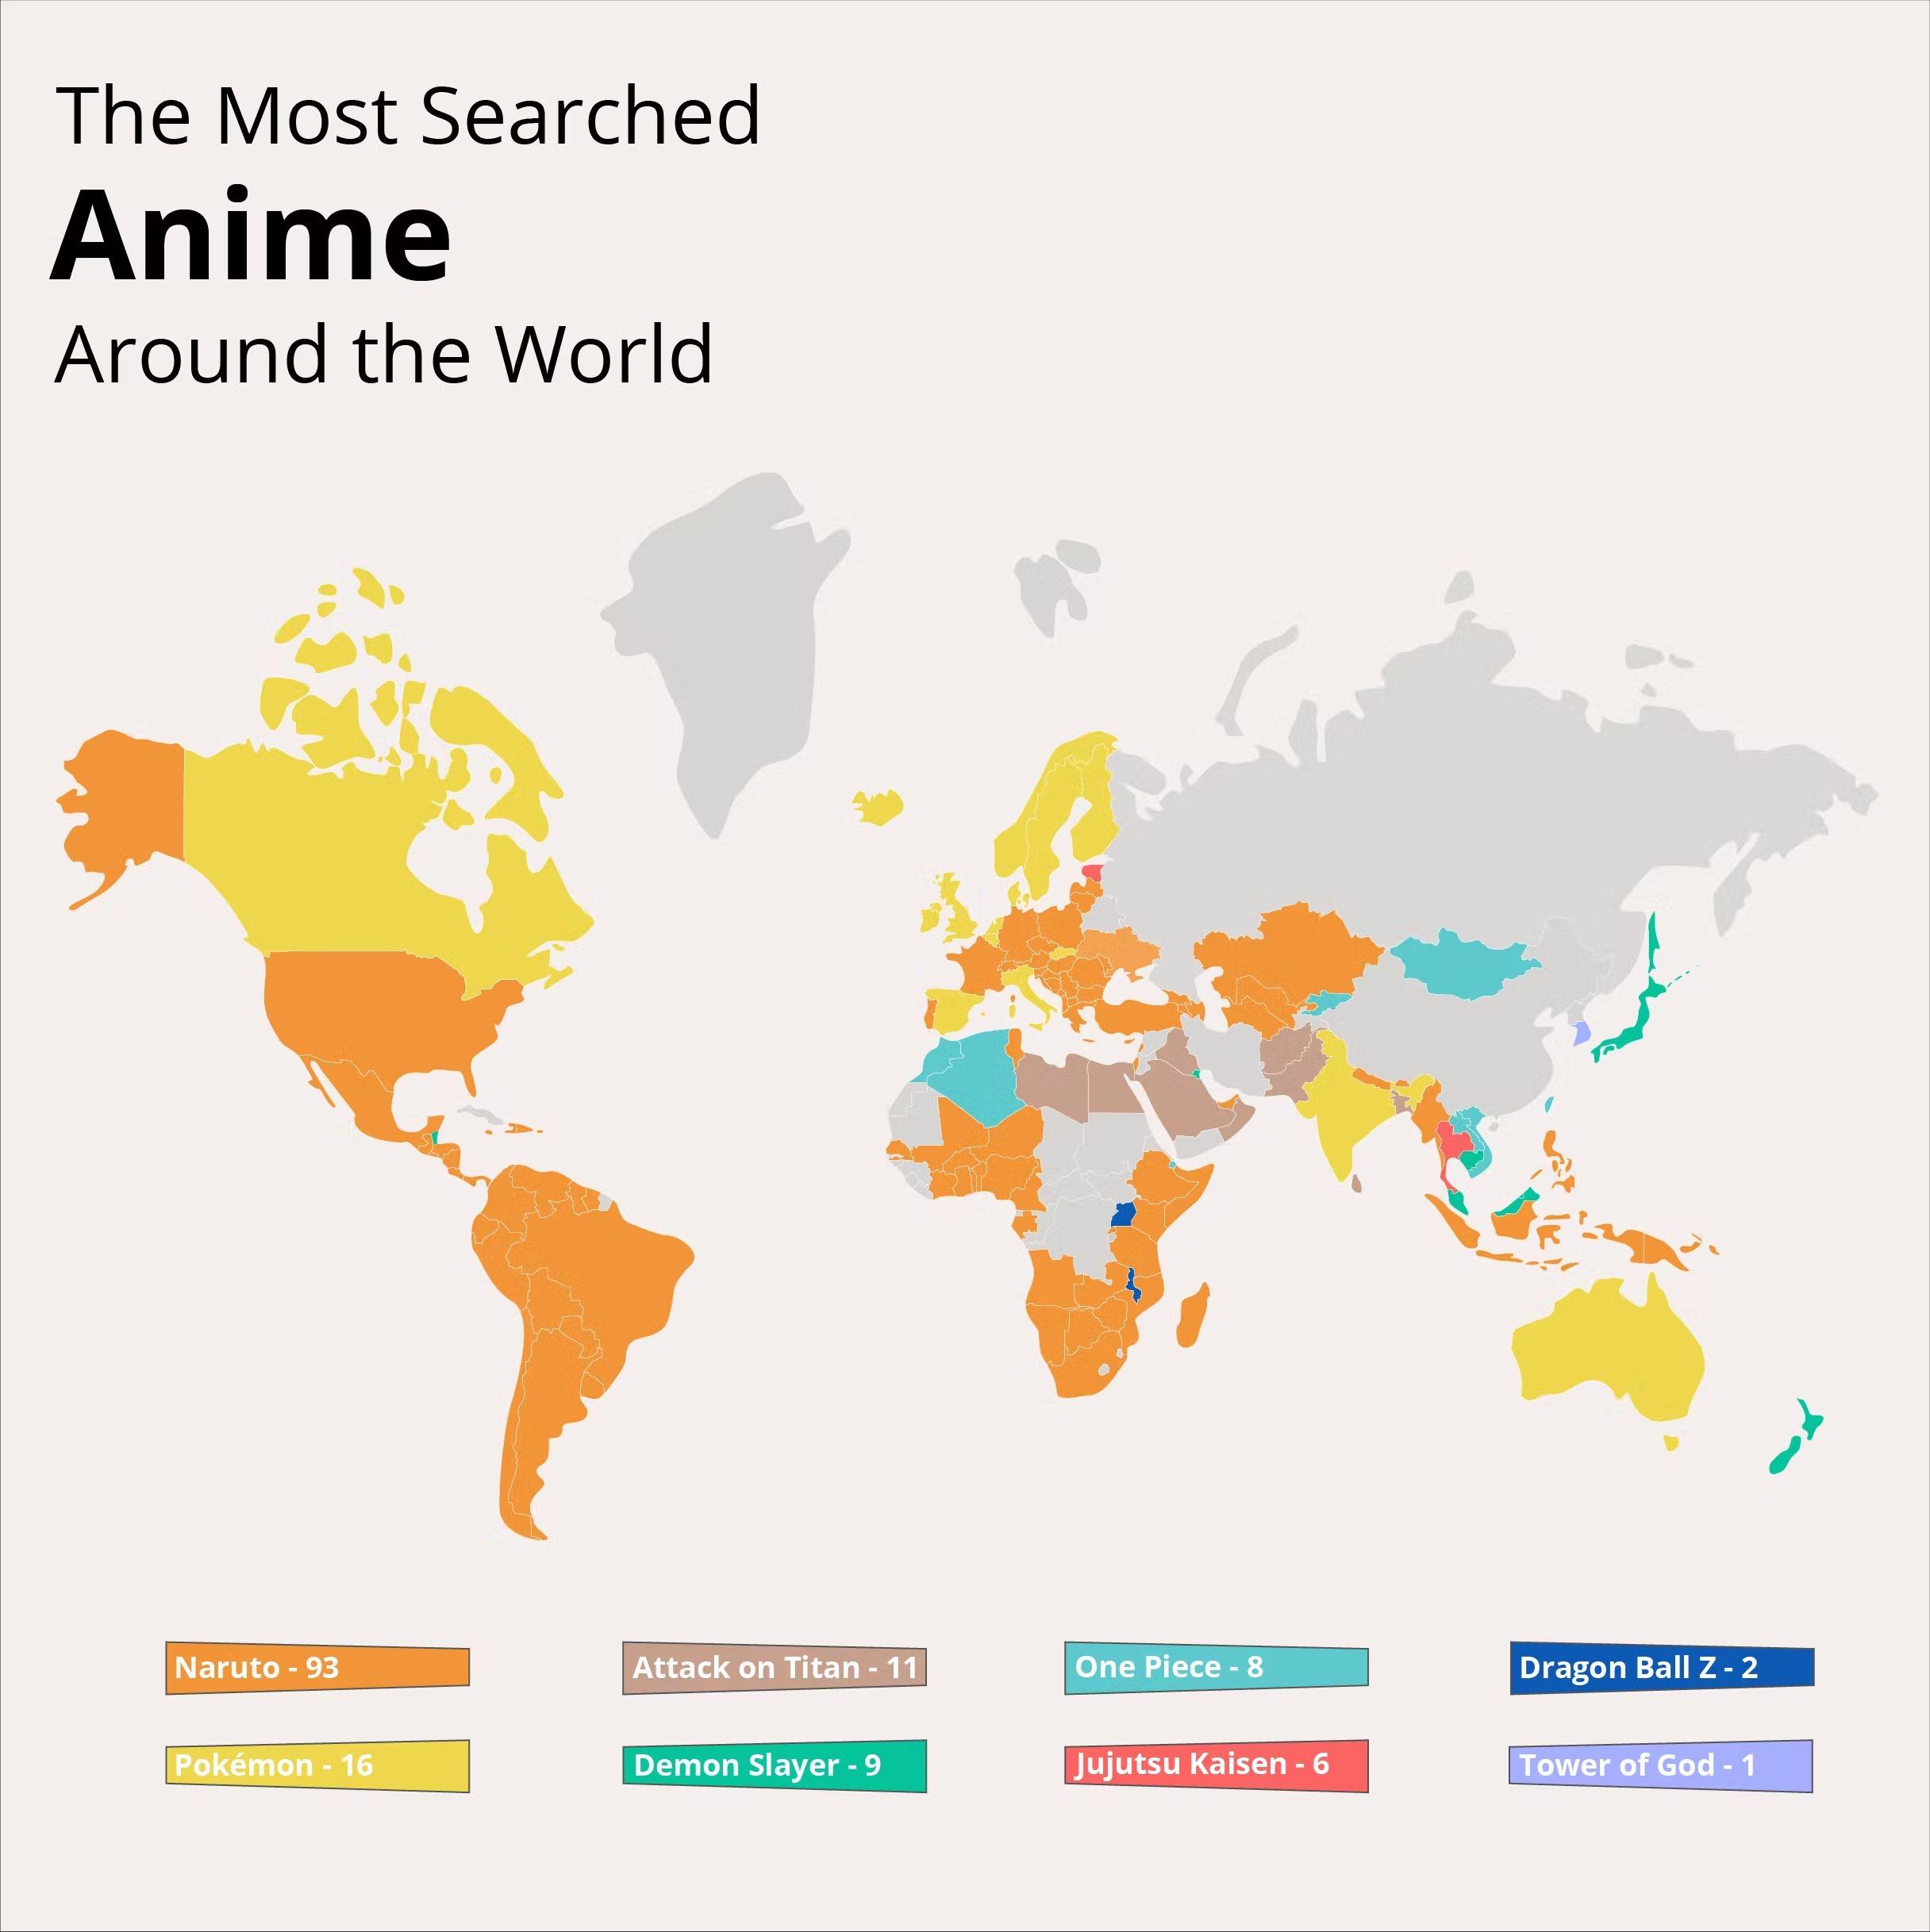 These are the ten most searched anime worldwide